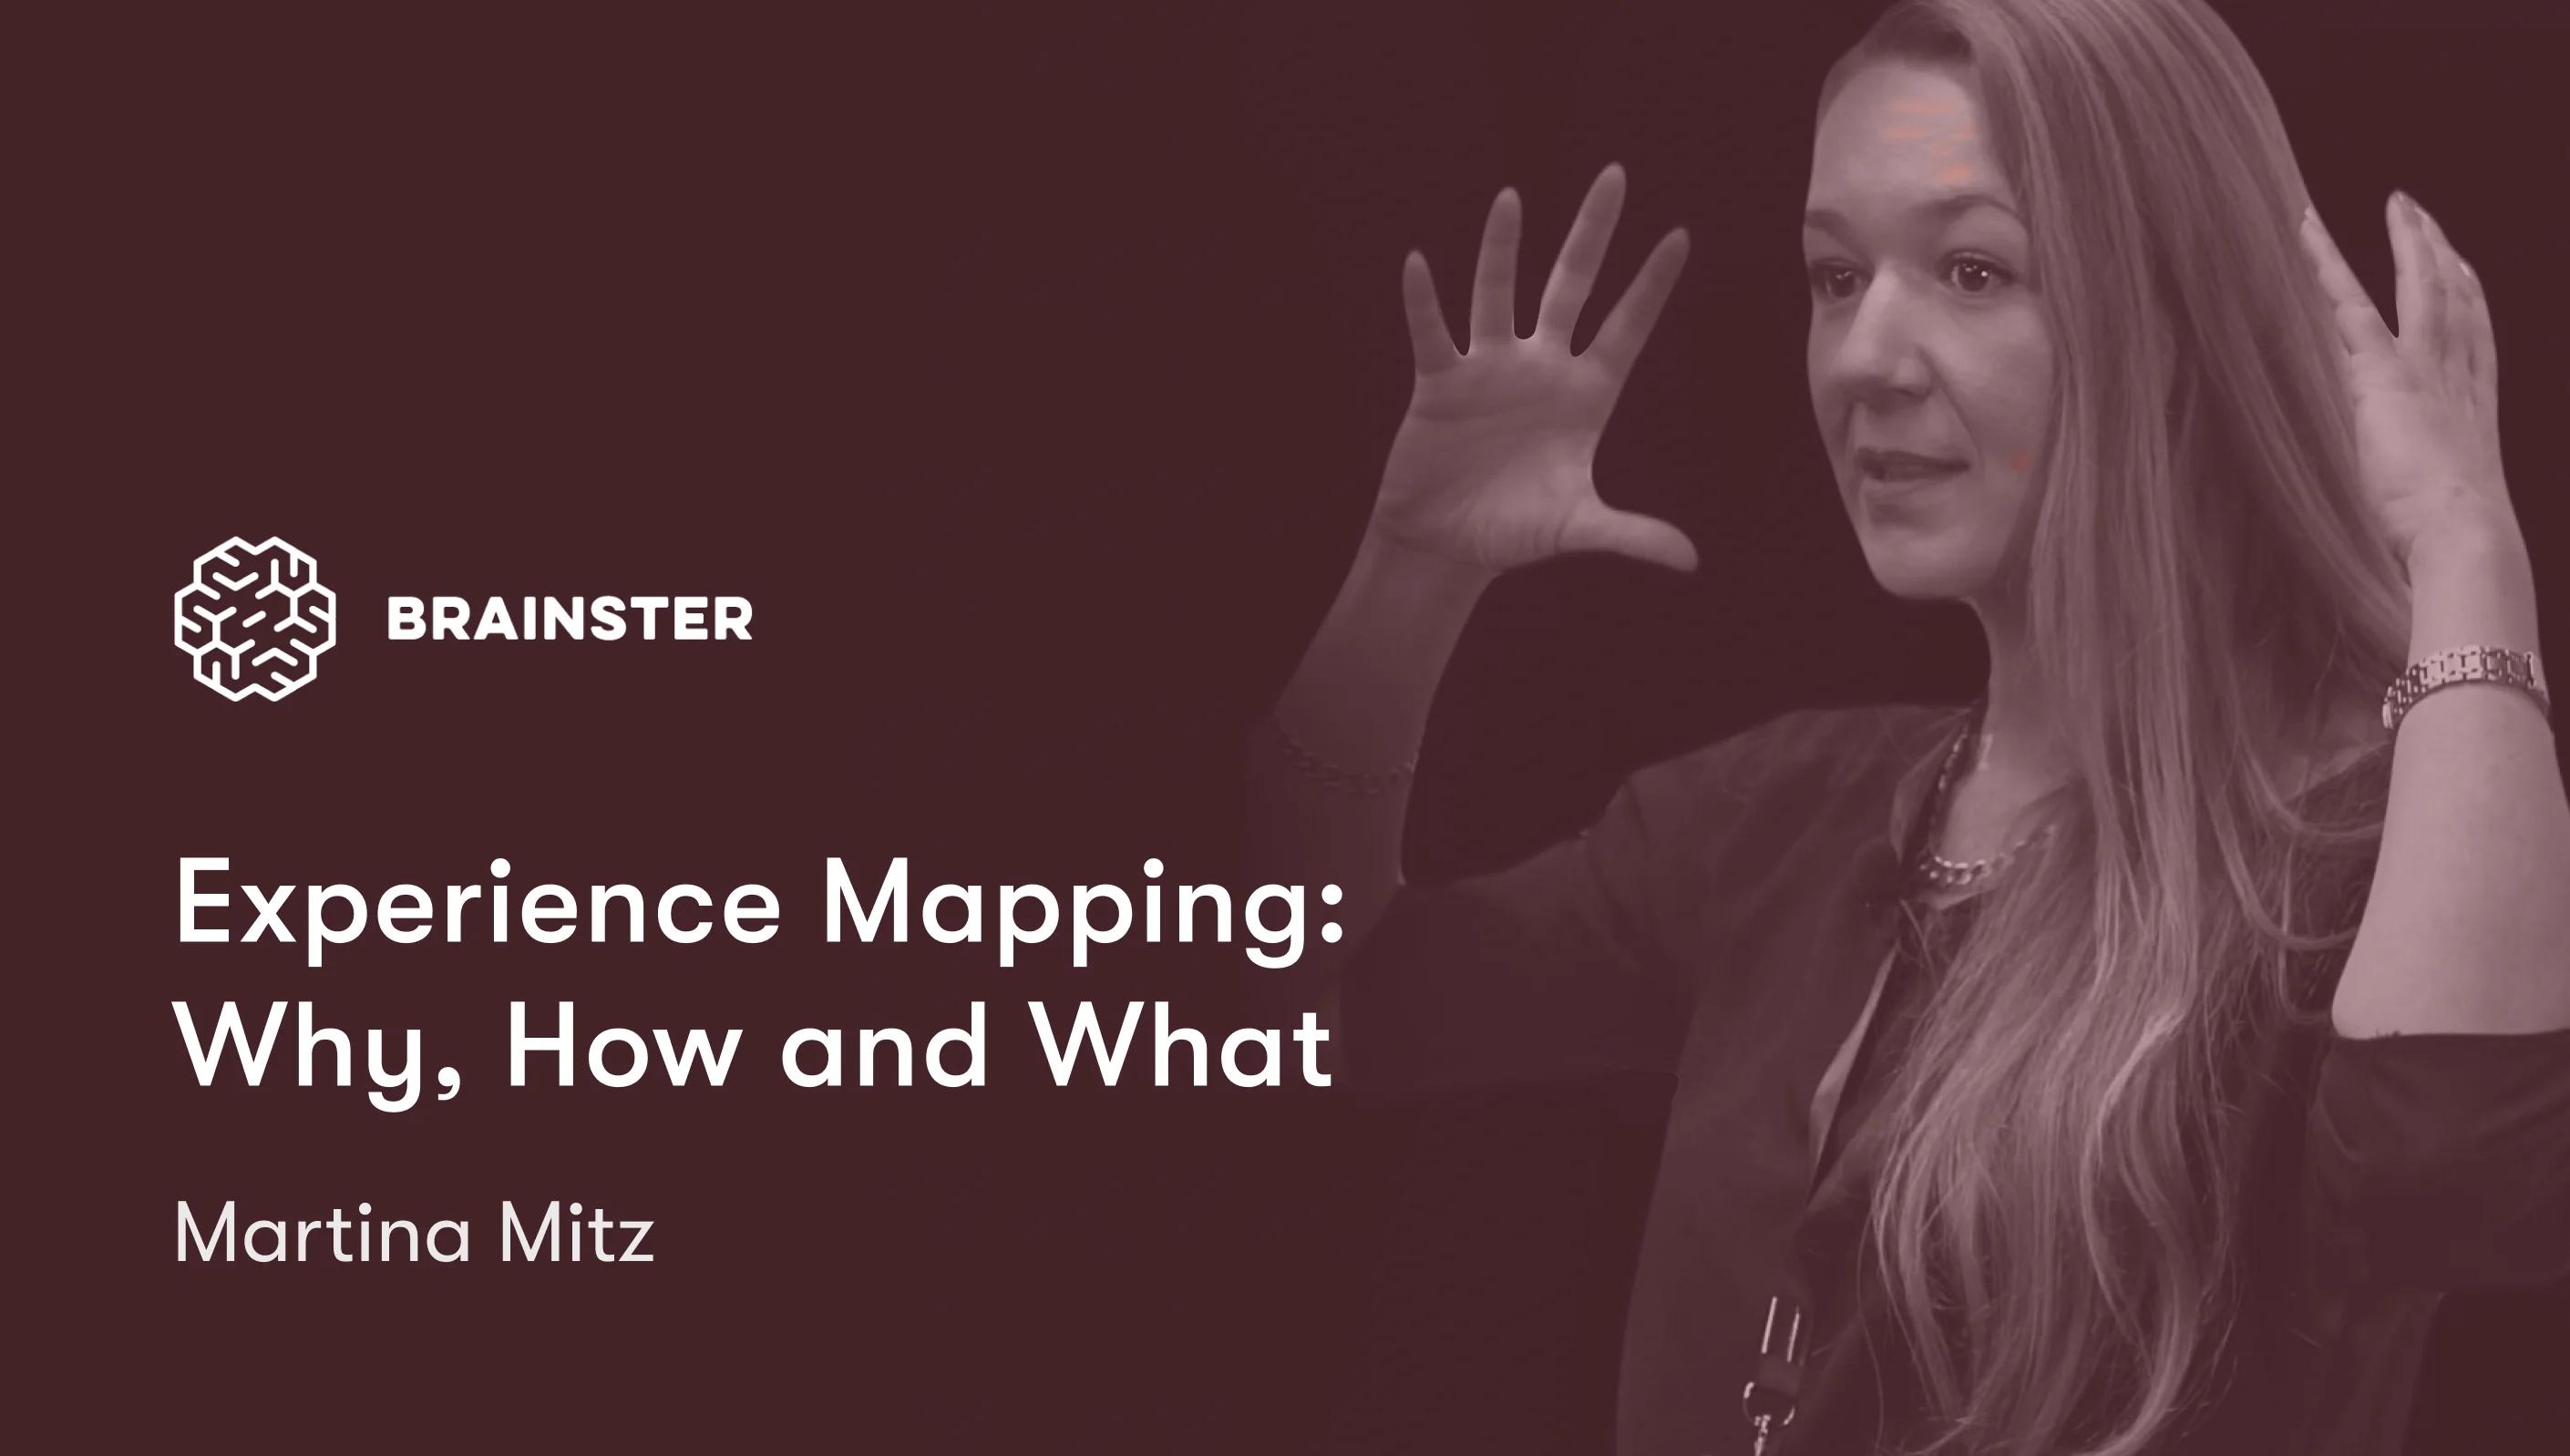 Experience Mapping: Why, How and What